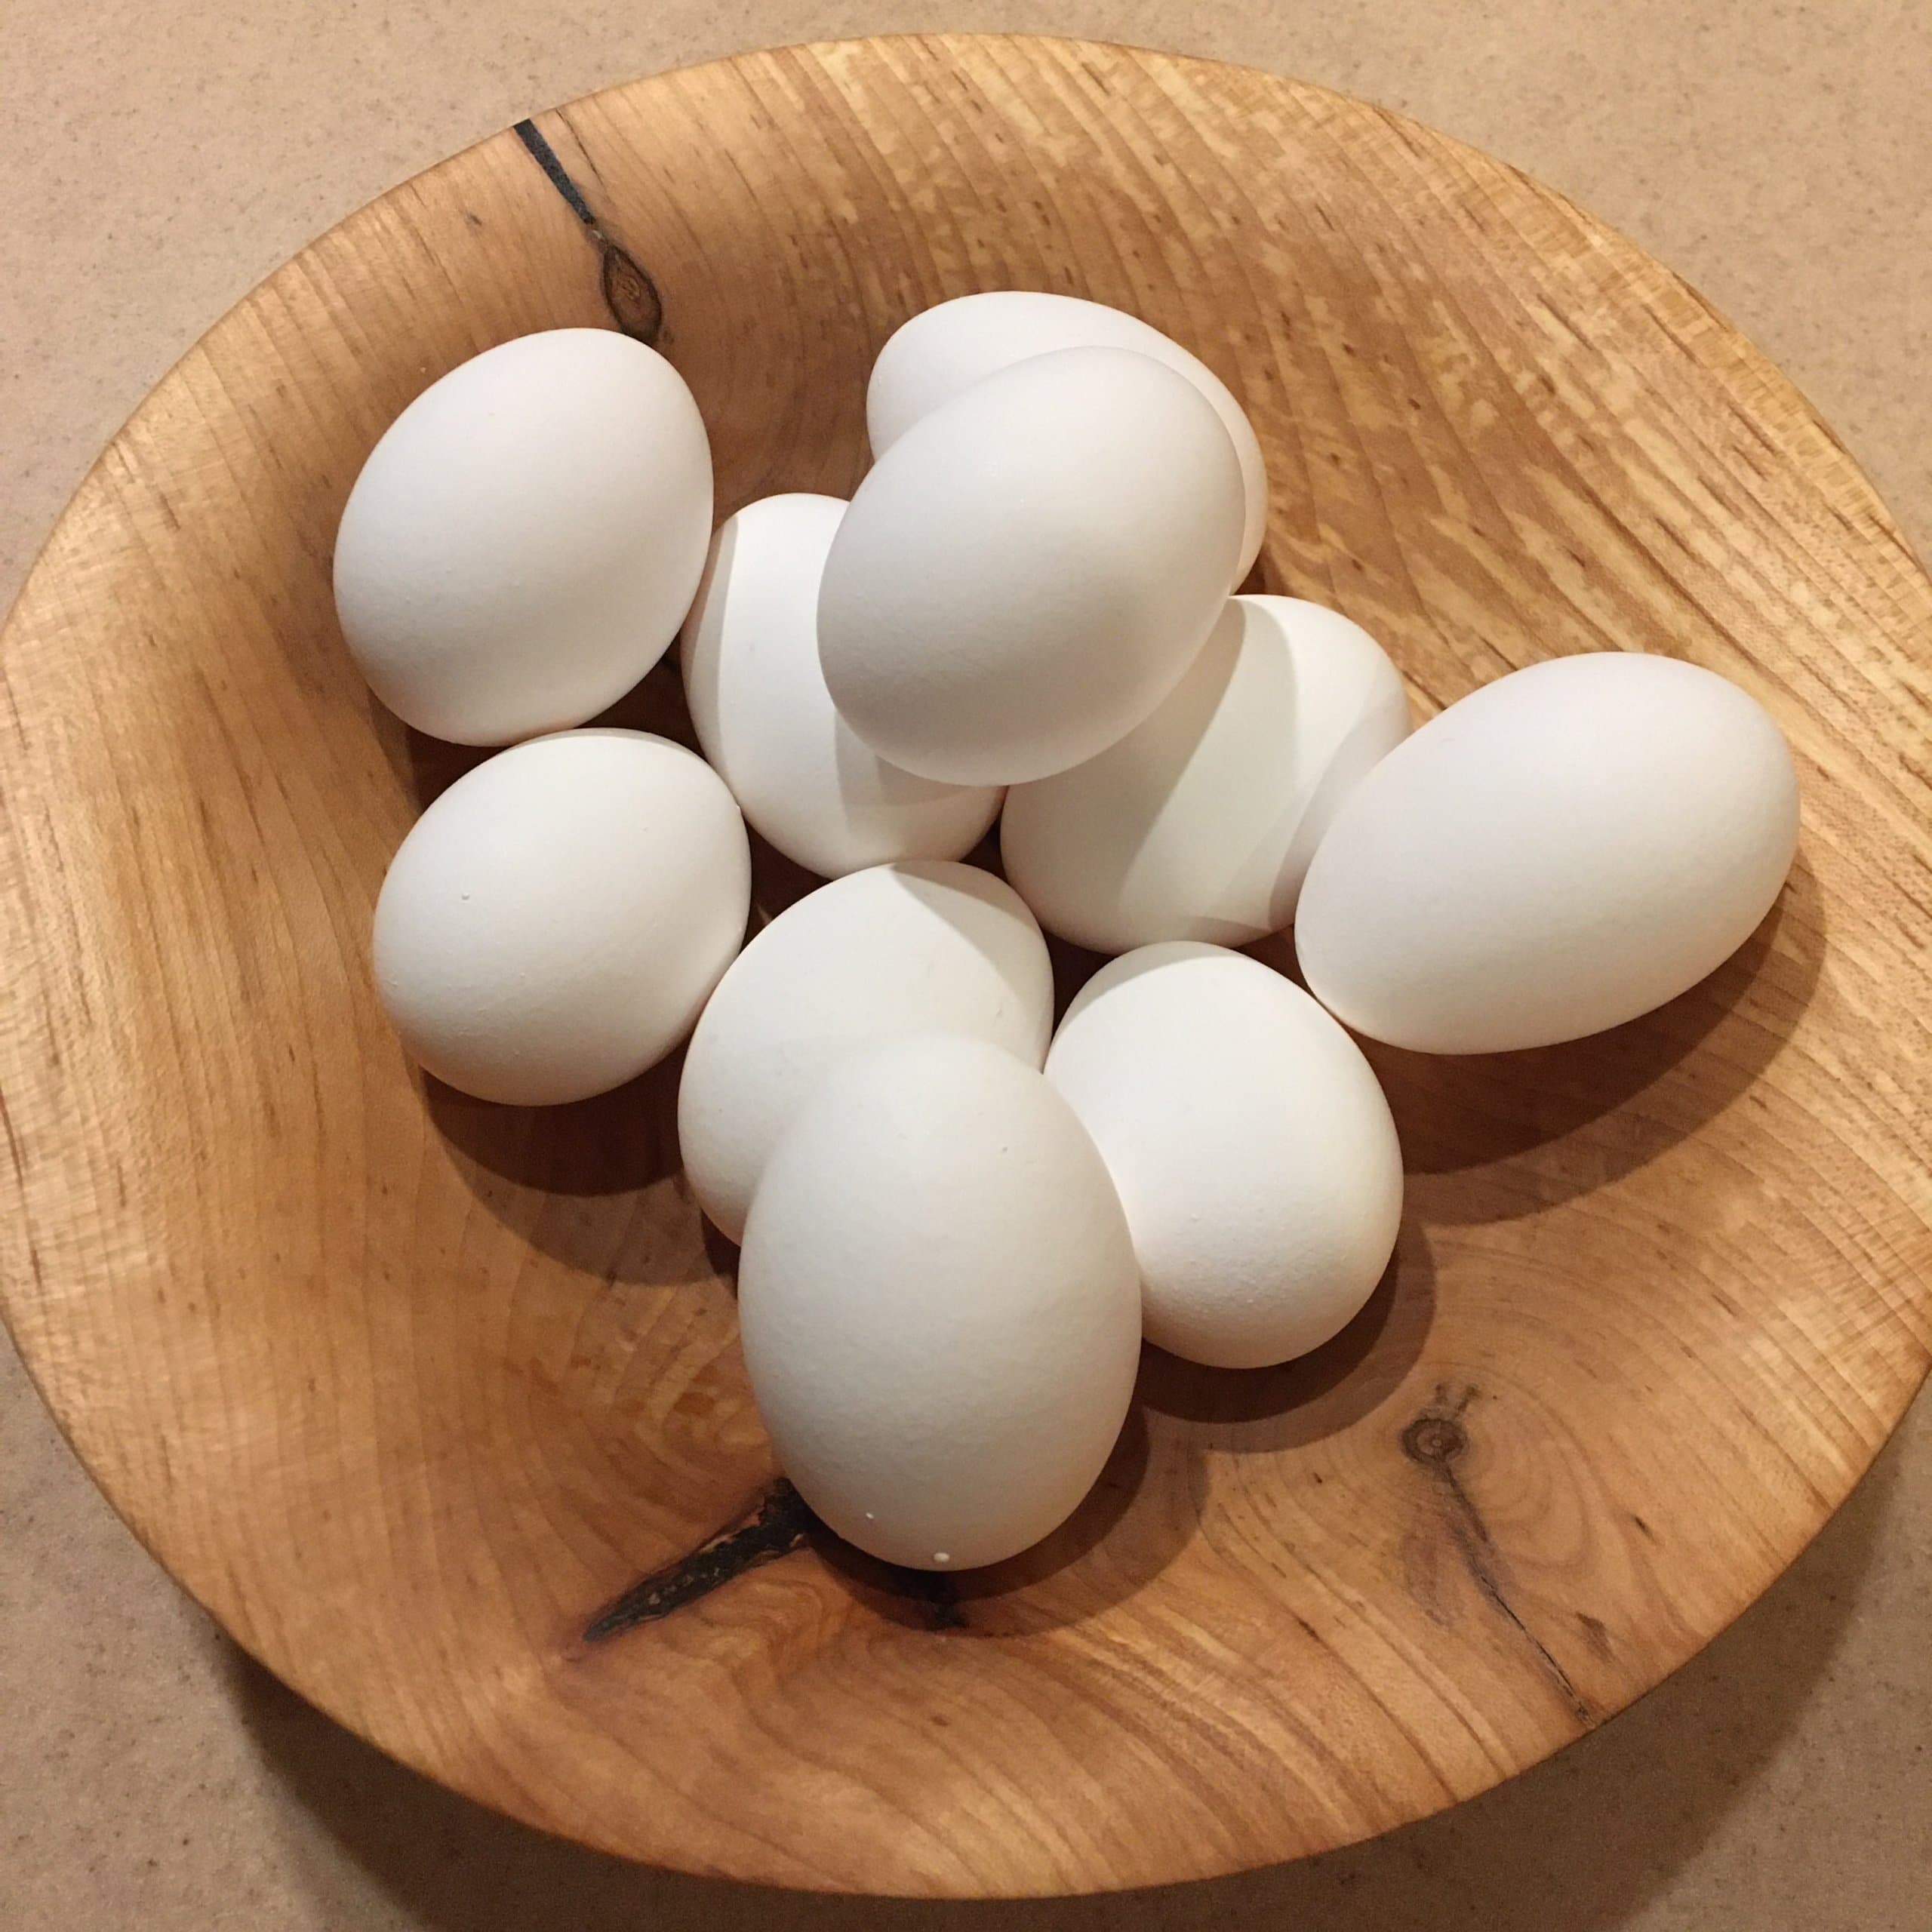 showing eggs in shells